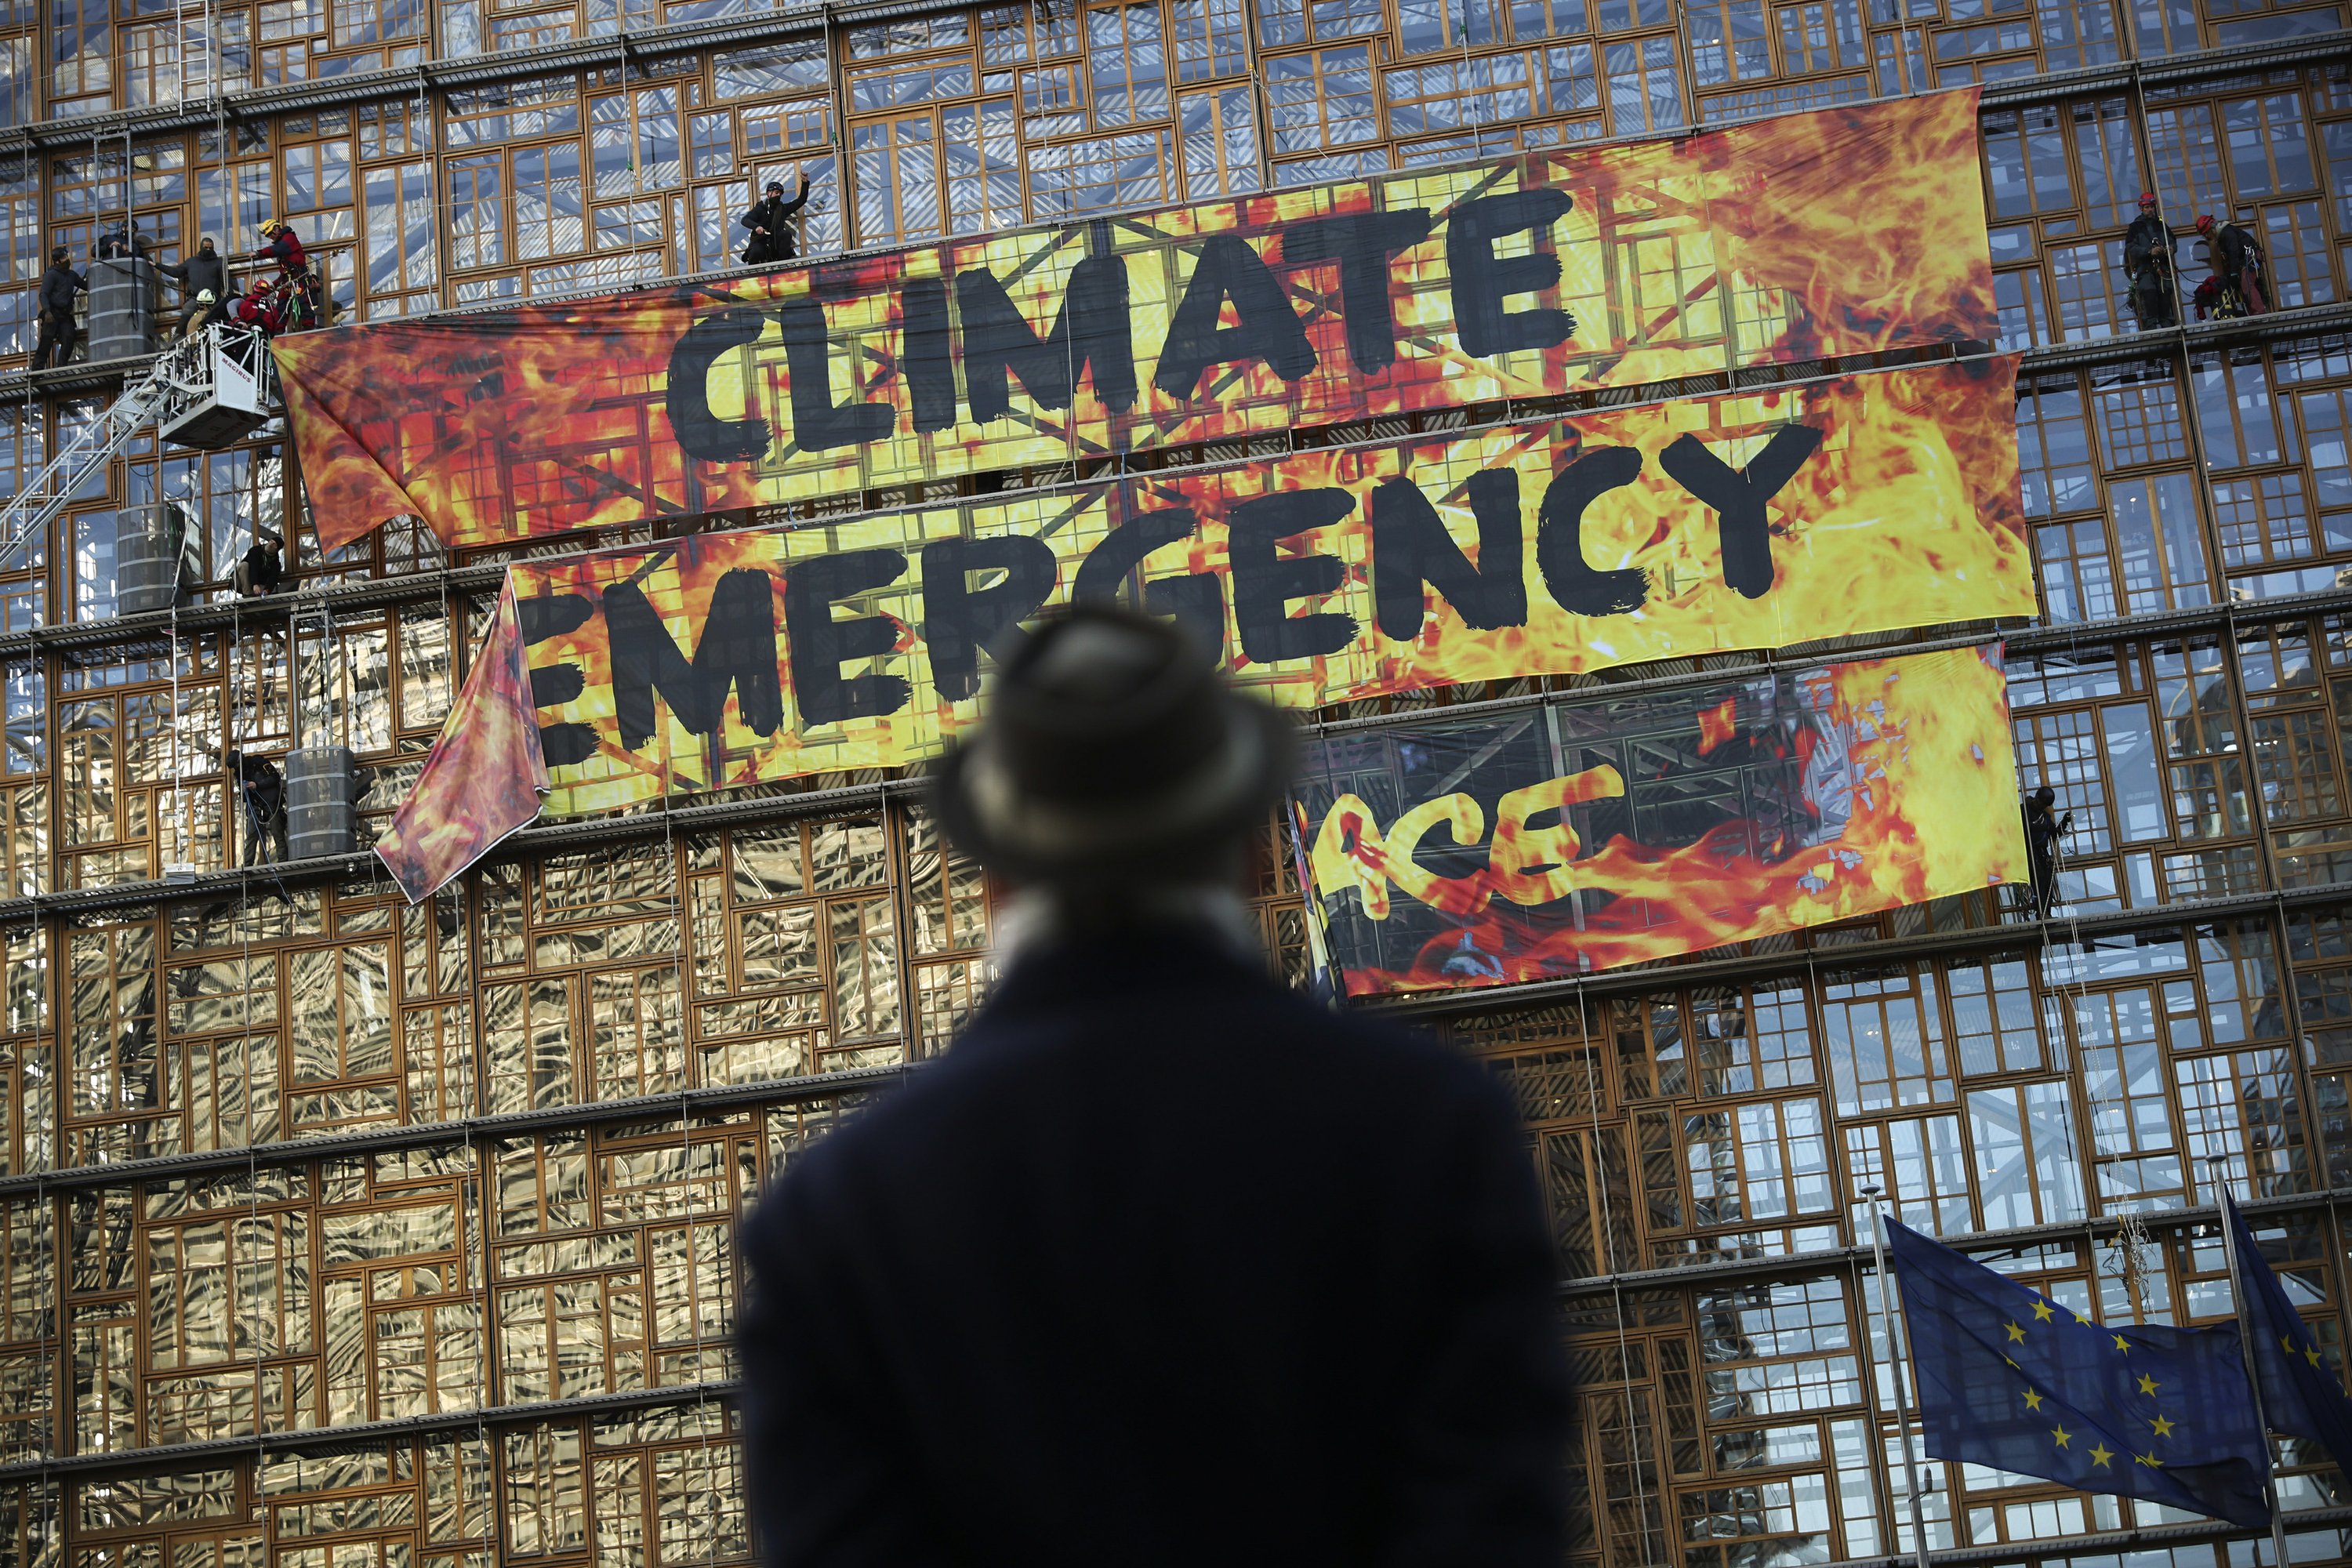 Climate change, Brexit divorce: EU faces challenges in 2020 - The Associated Press